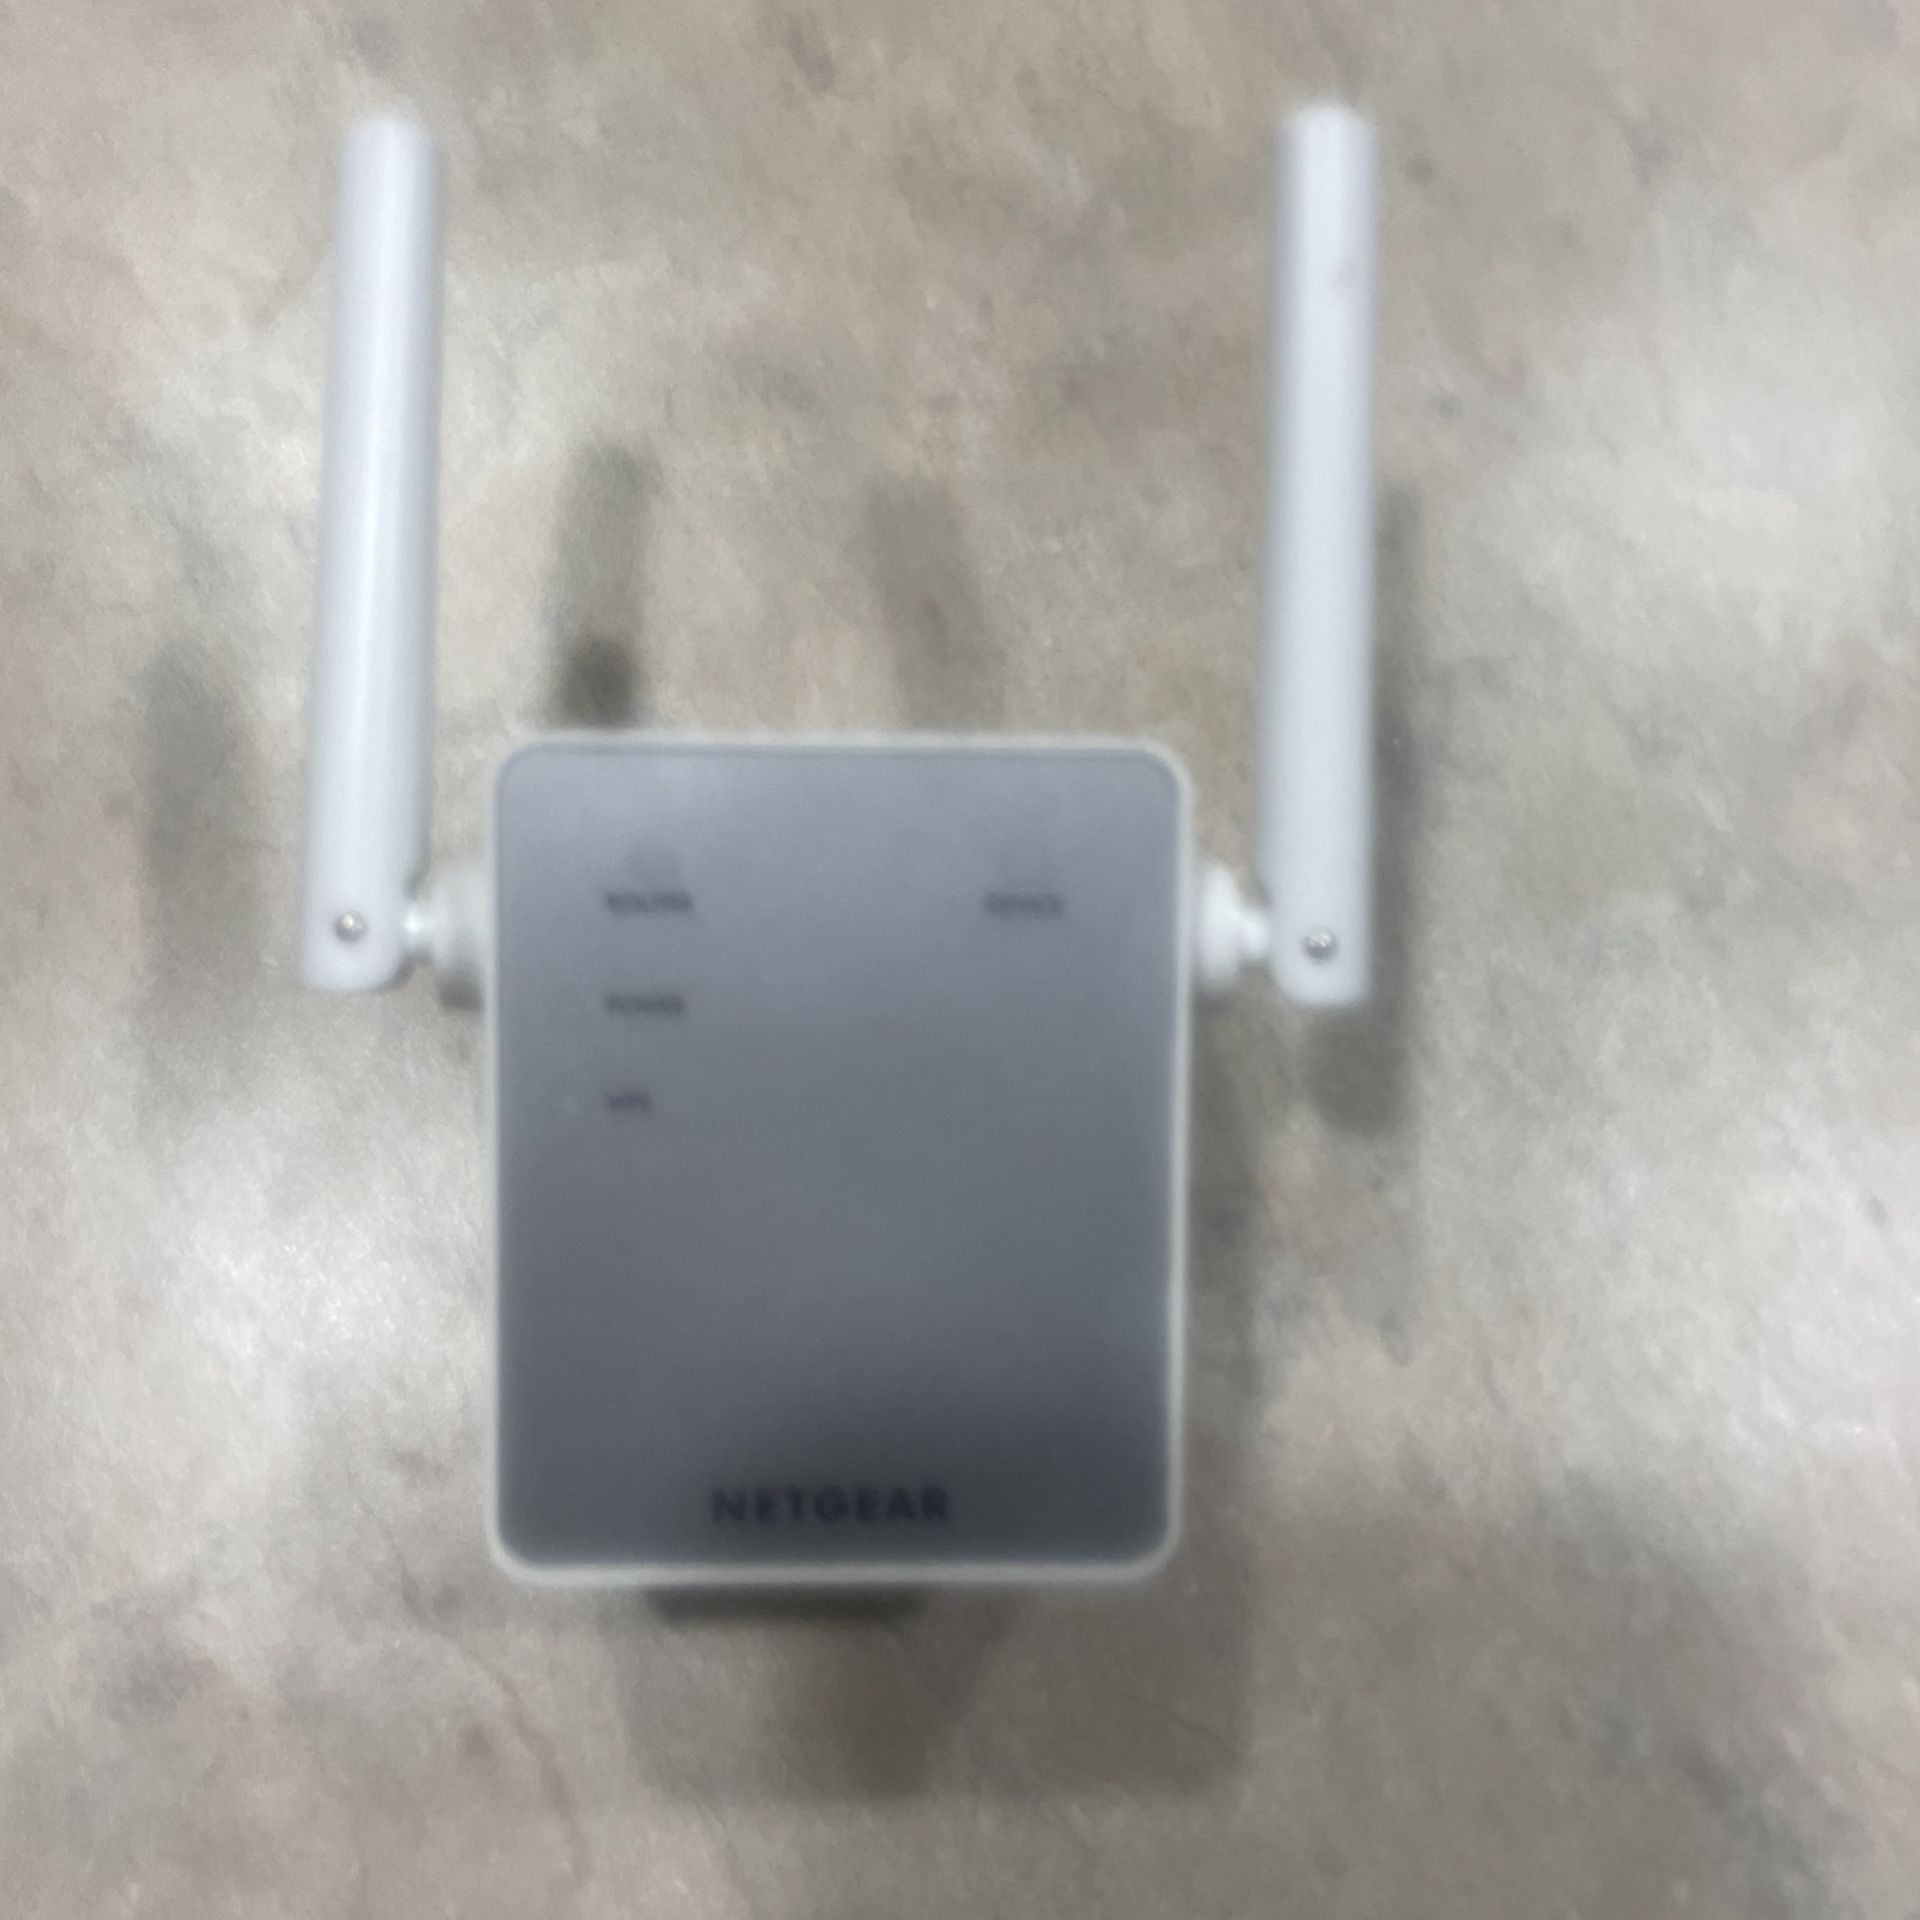 NETGEAR Wi-Fi Range Extender EX6120 - Coverage Up to 1500 Sq Ft